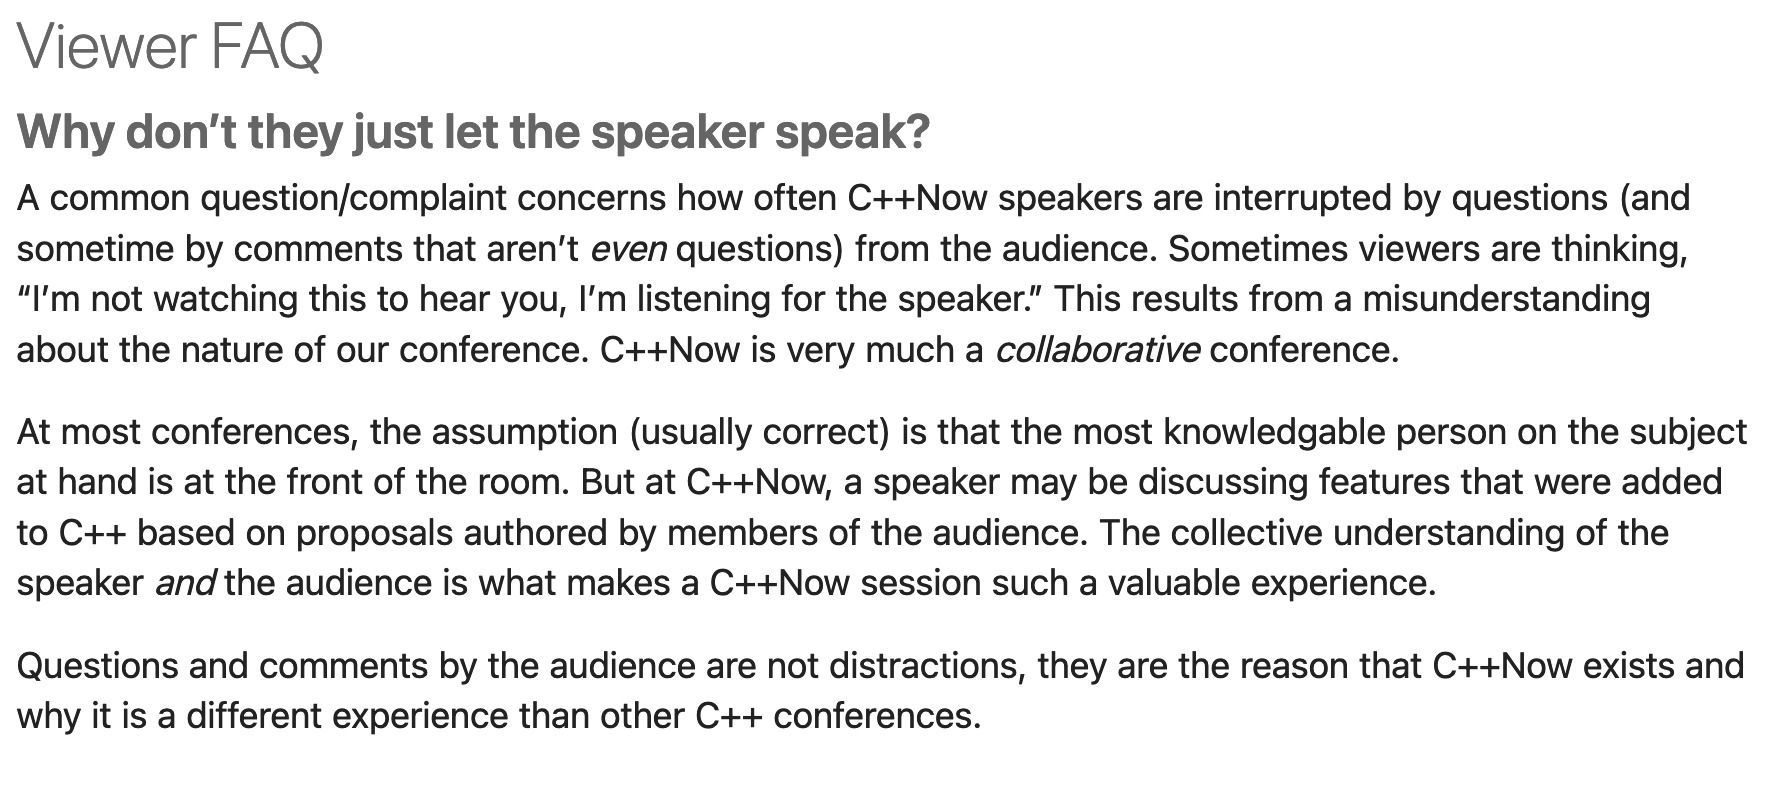 Why don’t they just let the speaker speak?  A common question/complaint concerns how often C++Now speakers are interrupted by questions (and sometime by comments that aren’t even questions) from the audience. Sometimes viewers are thinking, “I’m not watching this to hear you, I’m listening for the speaker.” This results from a misunderstanding about the nature of our conference. C++Now is very much a collaborative conference.